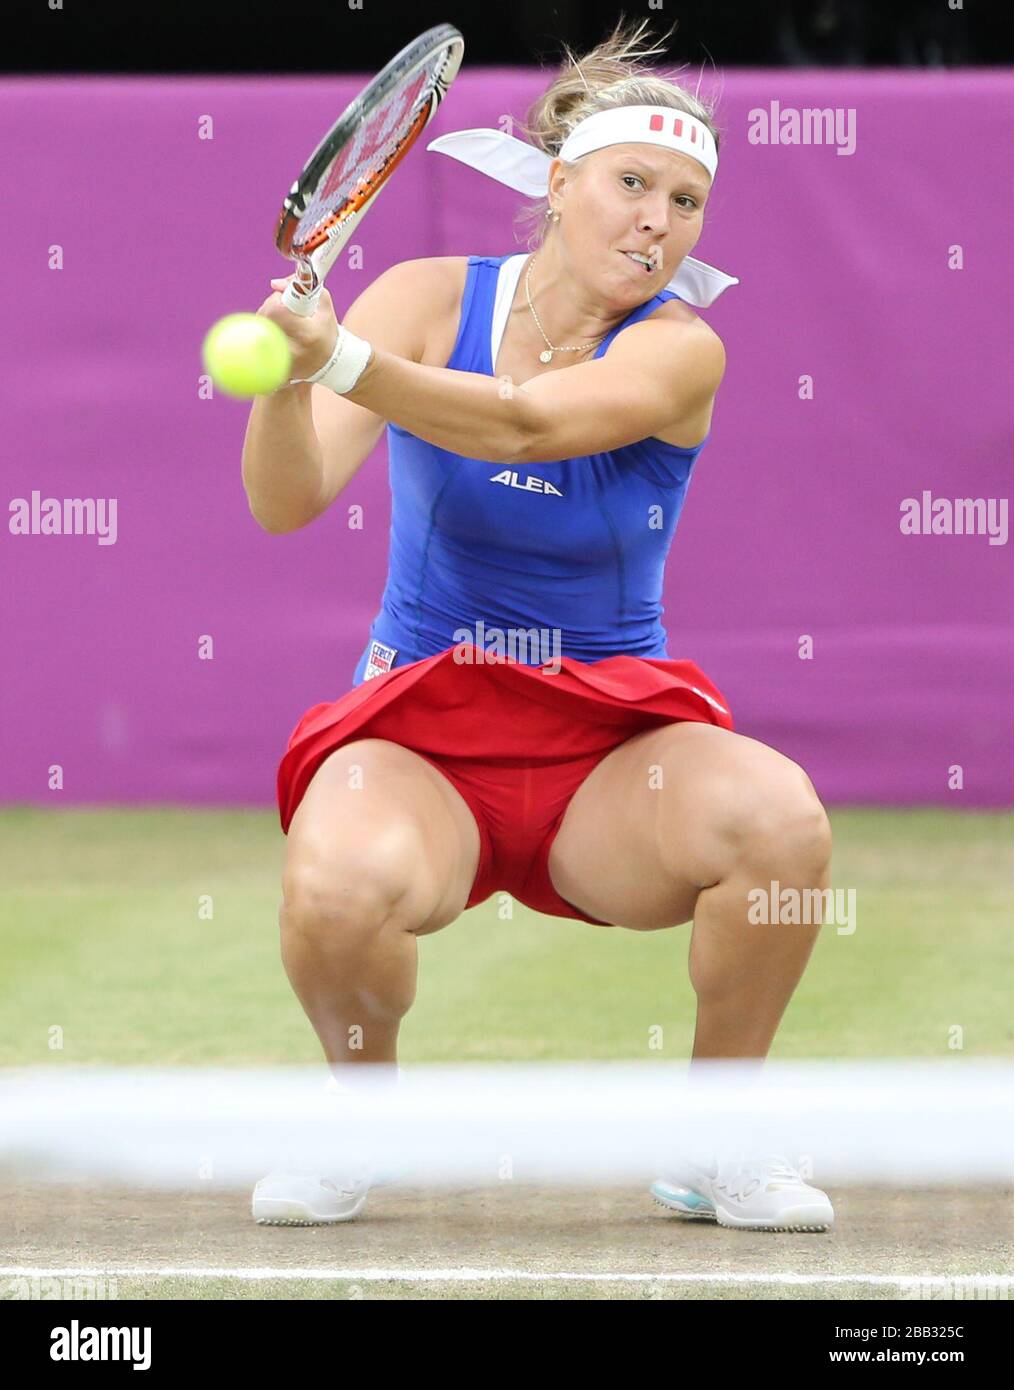 Women's tennis doubles player  Lucie Hradecka of the Czech Republic in action in the final against Serena and Venus Williams  at Wimbledon at the London 2012 Olympics Stock Photo